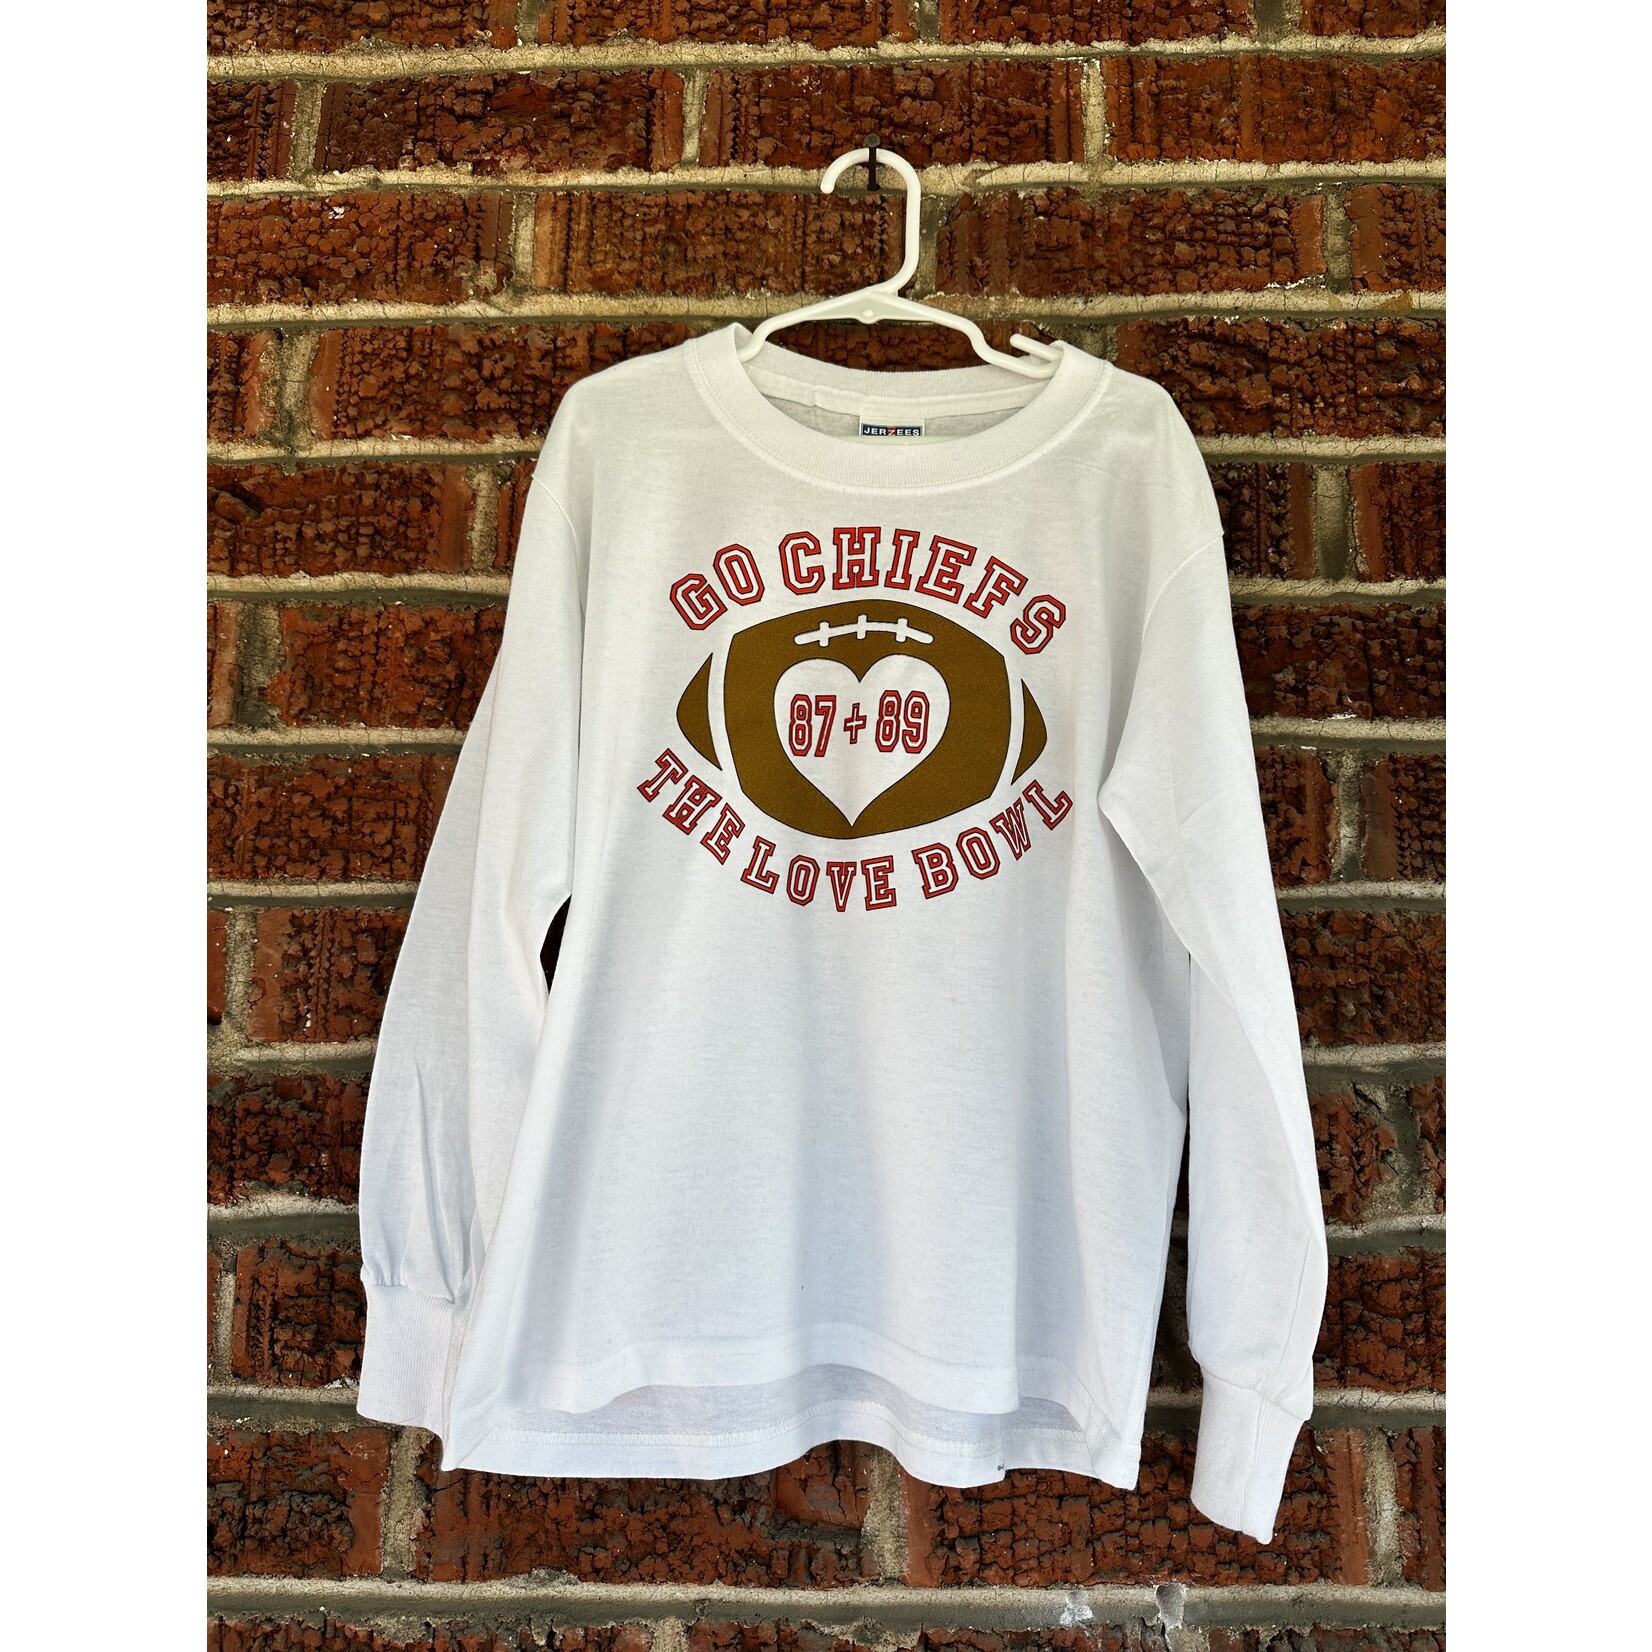 Two and a Half Sisters Love Bowl Youth Long Sleeve